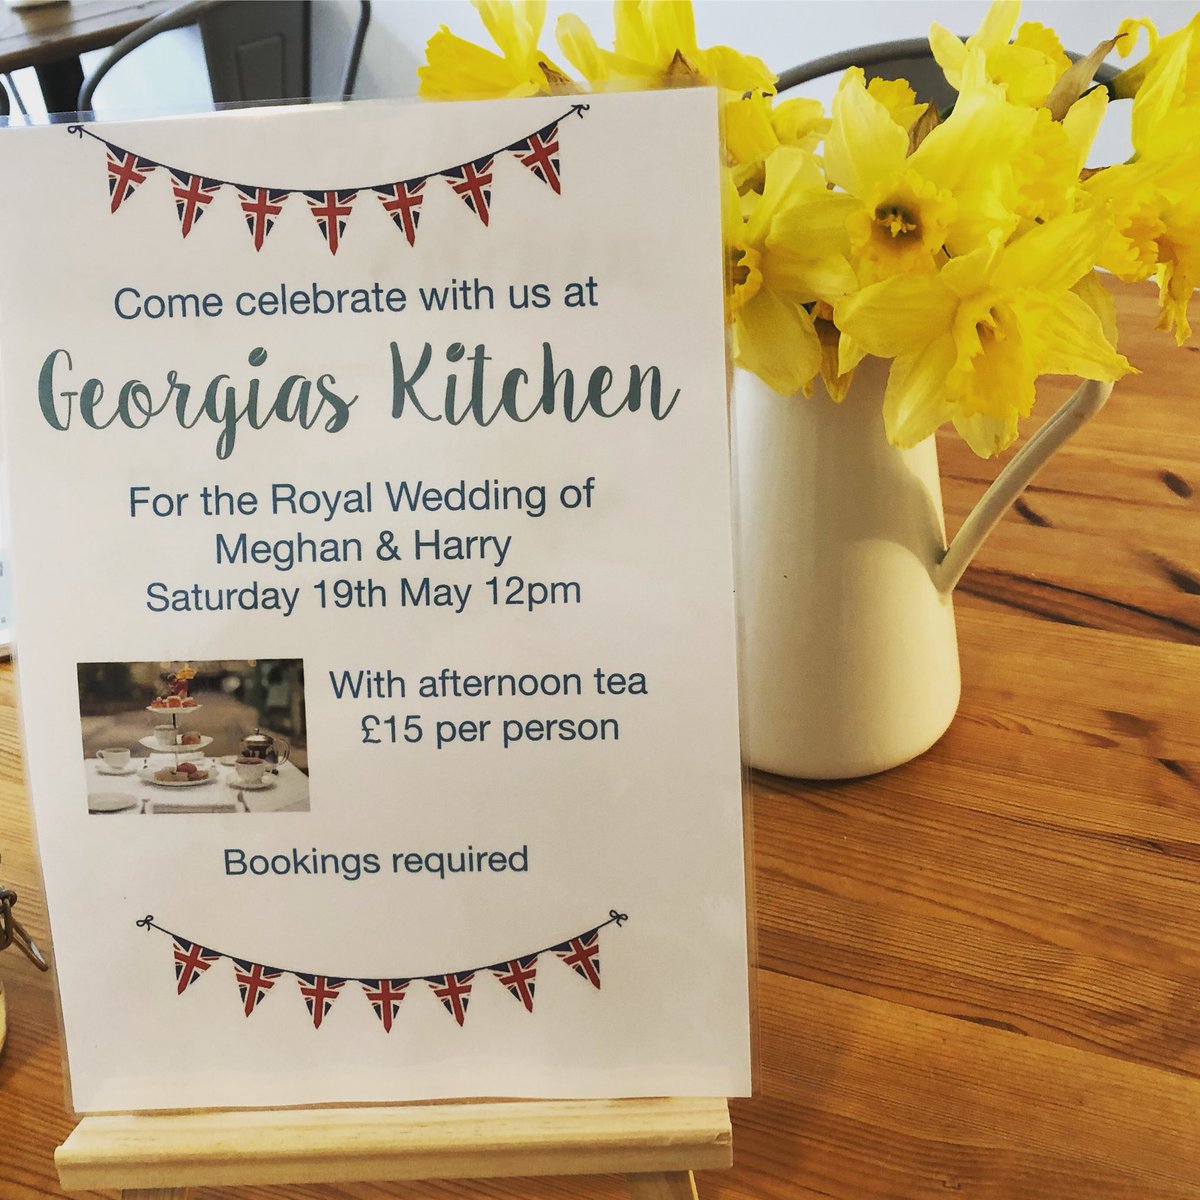 The royal wedding is fast approaching... why not celebrate at Georgias Kitchen with afternoon tea! (Bookings required) #afternoonteaparty #royalwedding #meghanandharry #celebrations #royalfamily #weddingtime